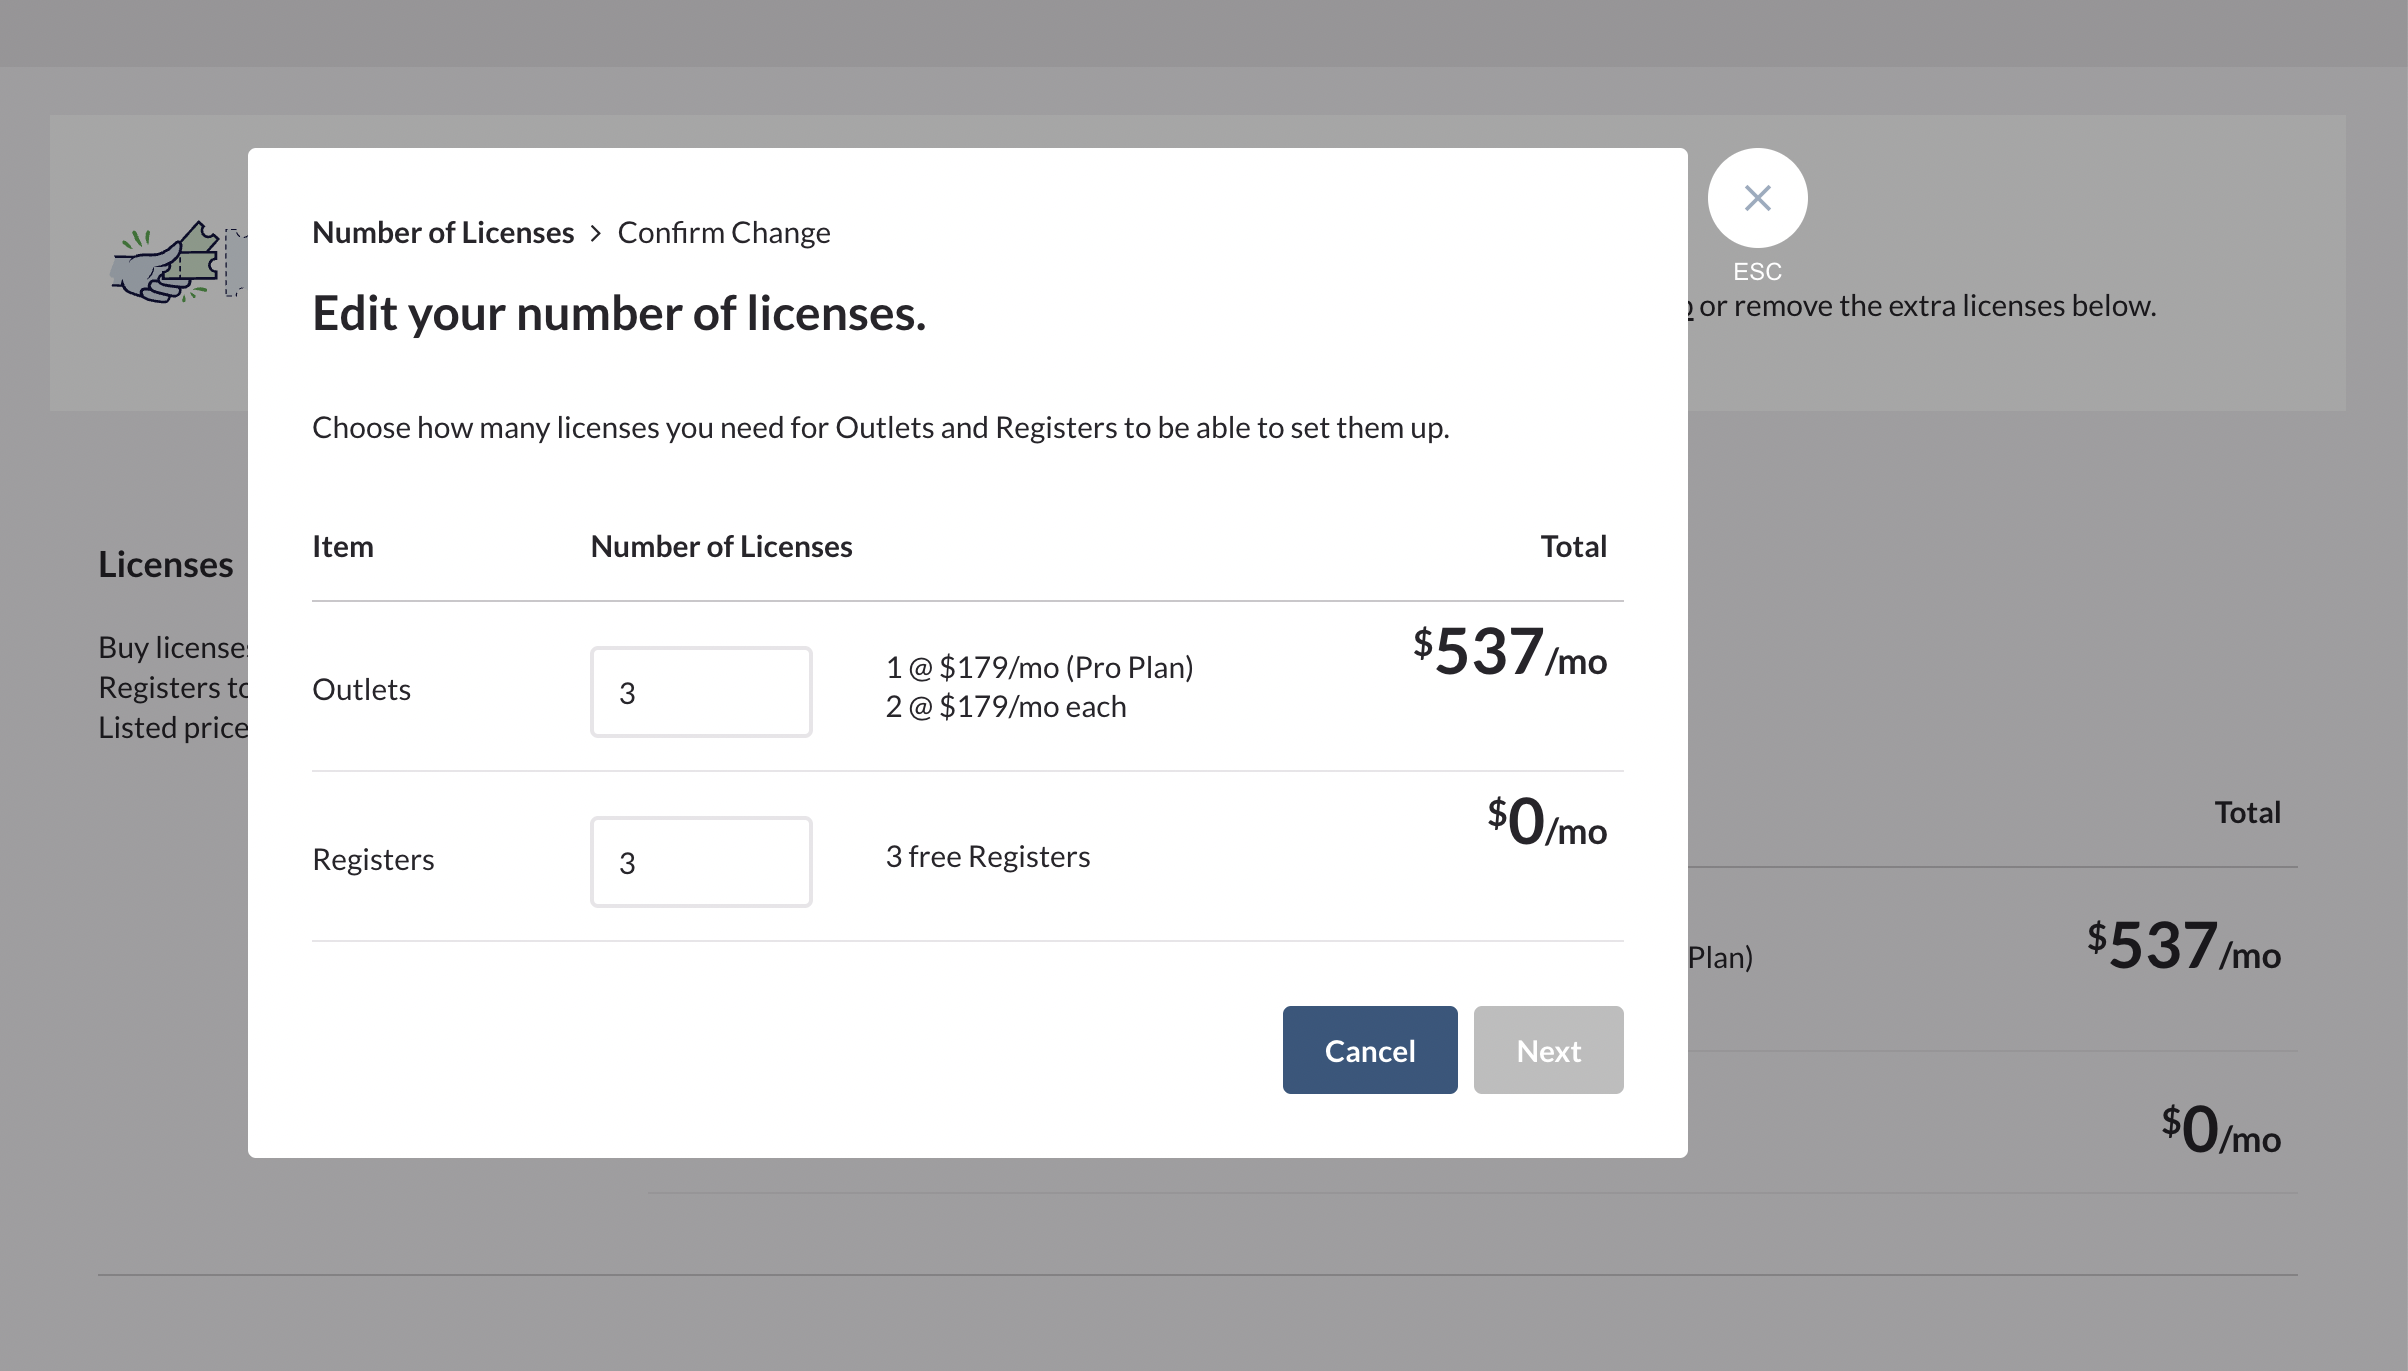 After clicking the Edit Licenses button, an Edit your number of licenses pop up comes up with input fields, pricing, and Cancel / Next buttons.